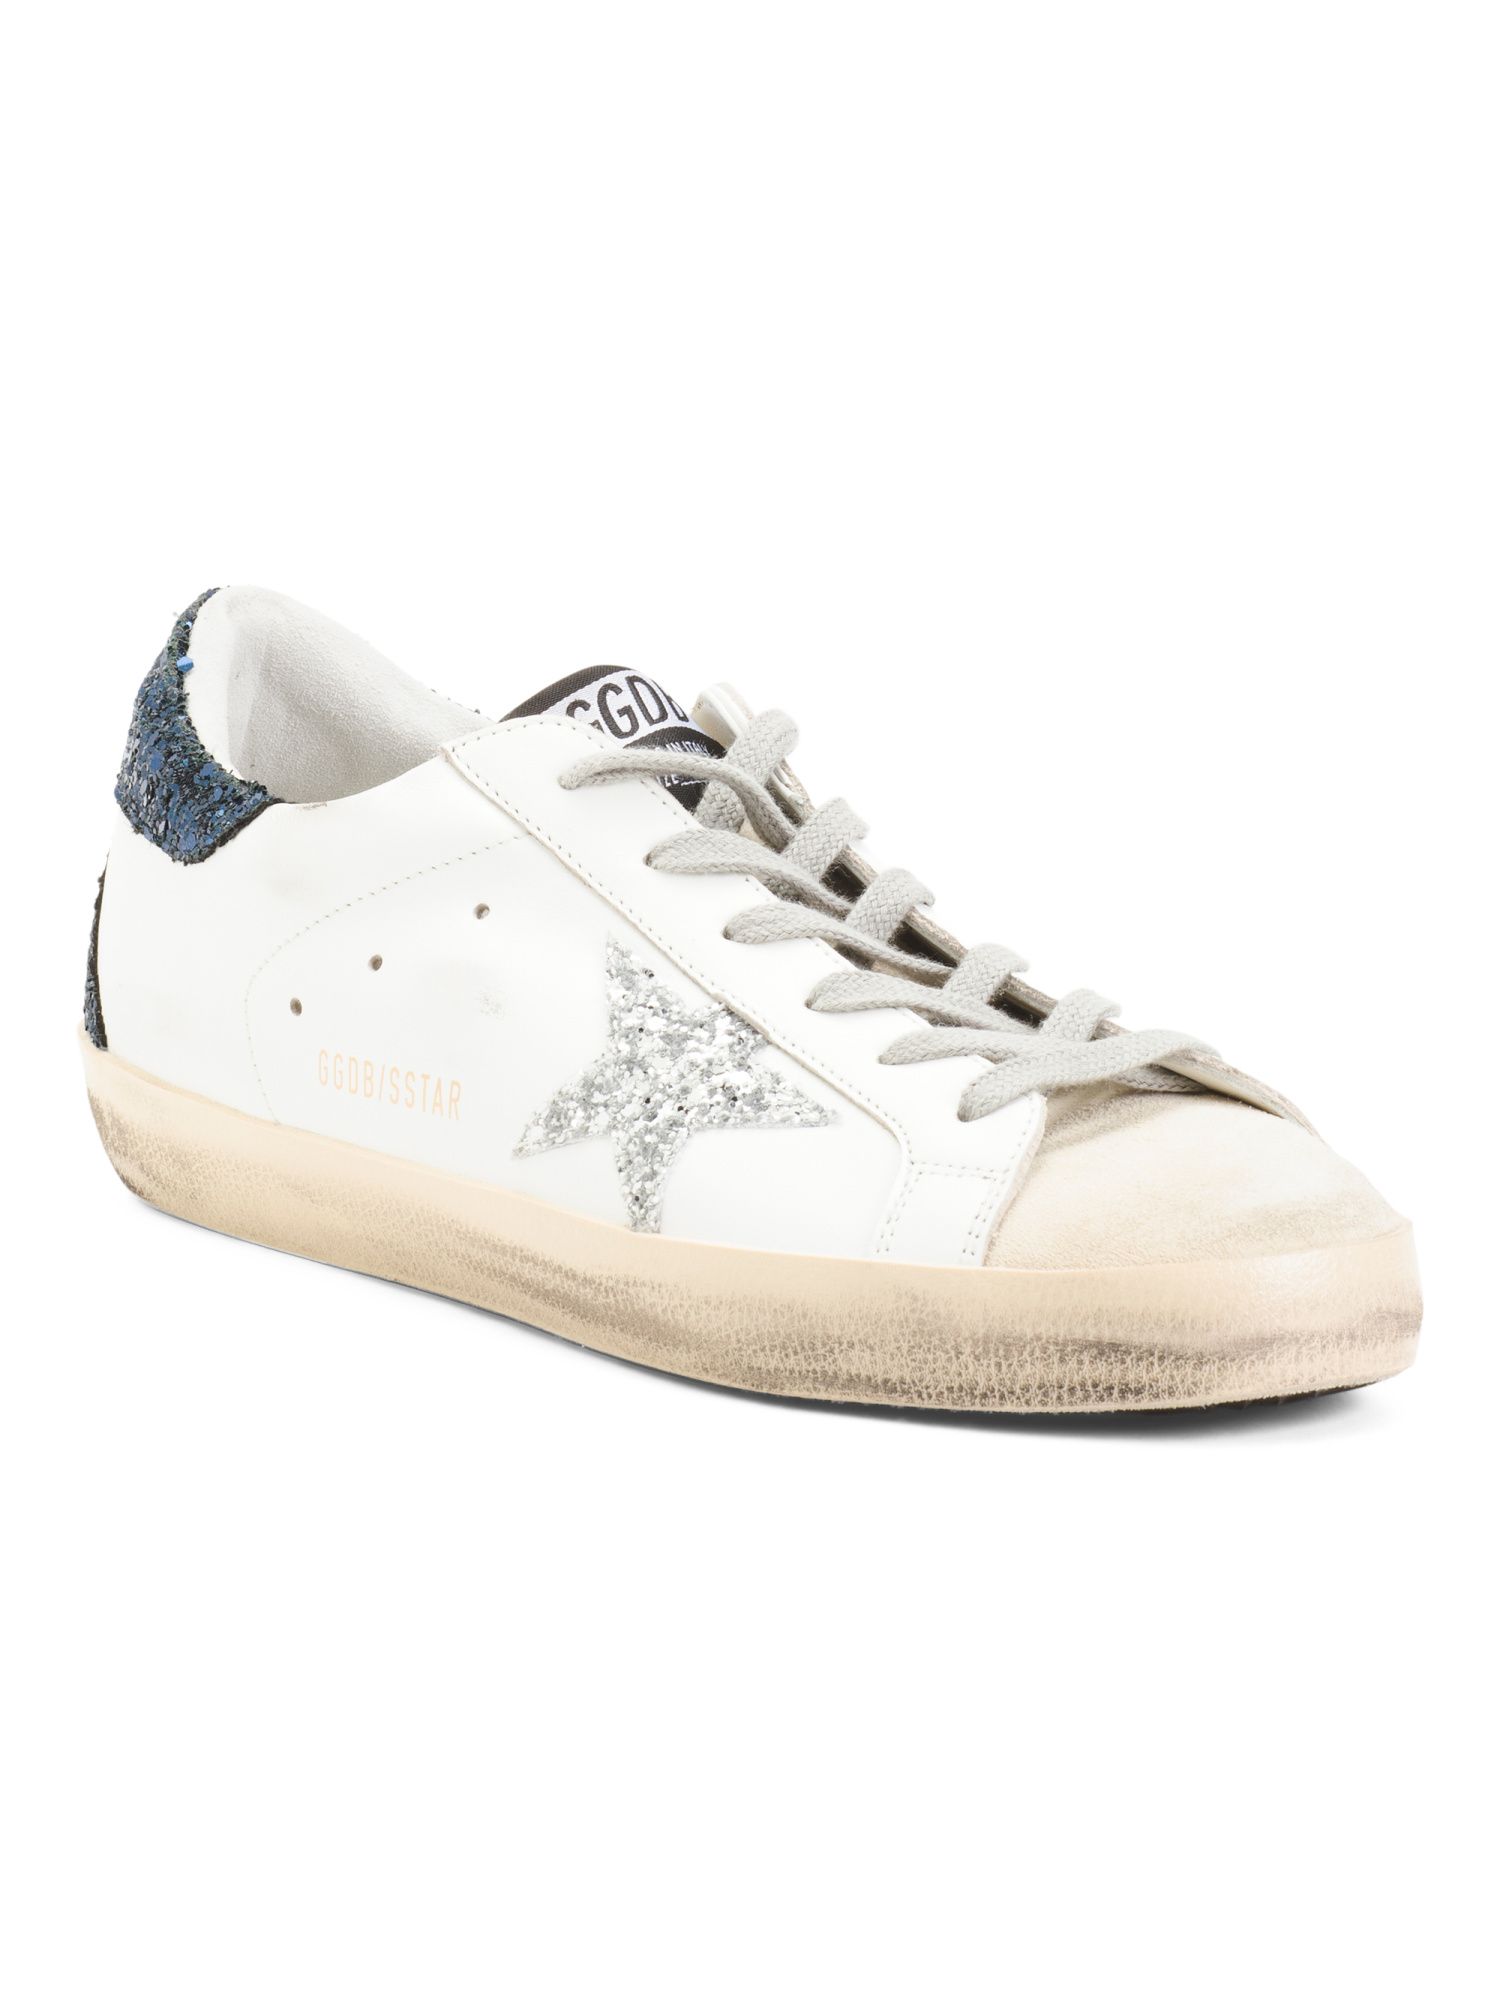 Made In Italy Leather Distressed Glitter Sneakers | TJ Maxx